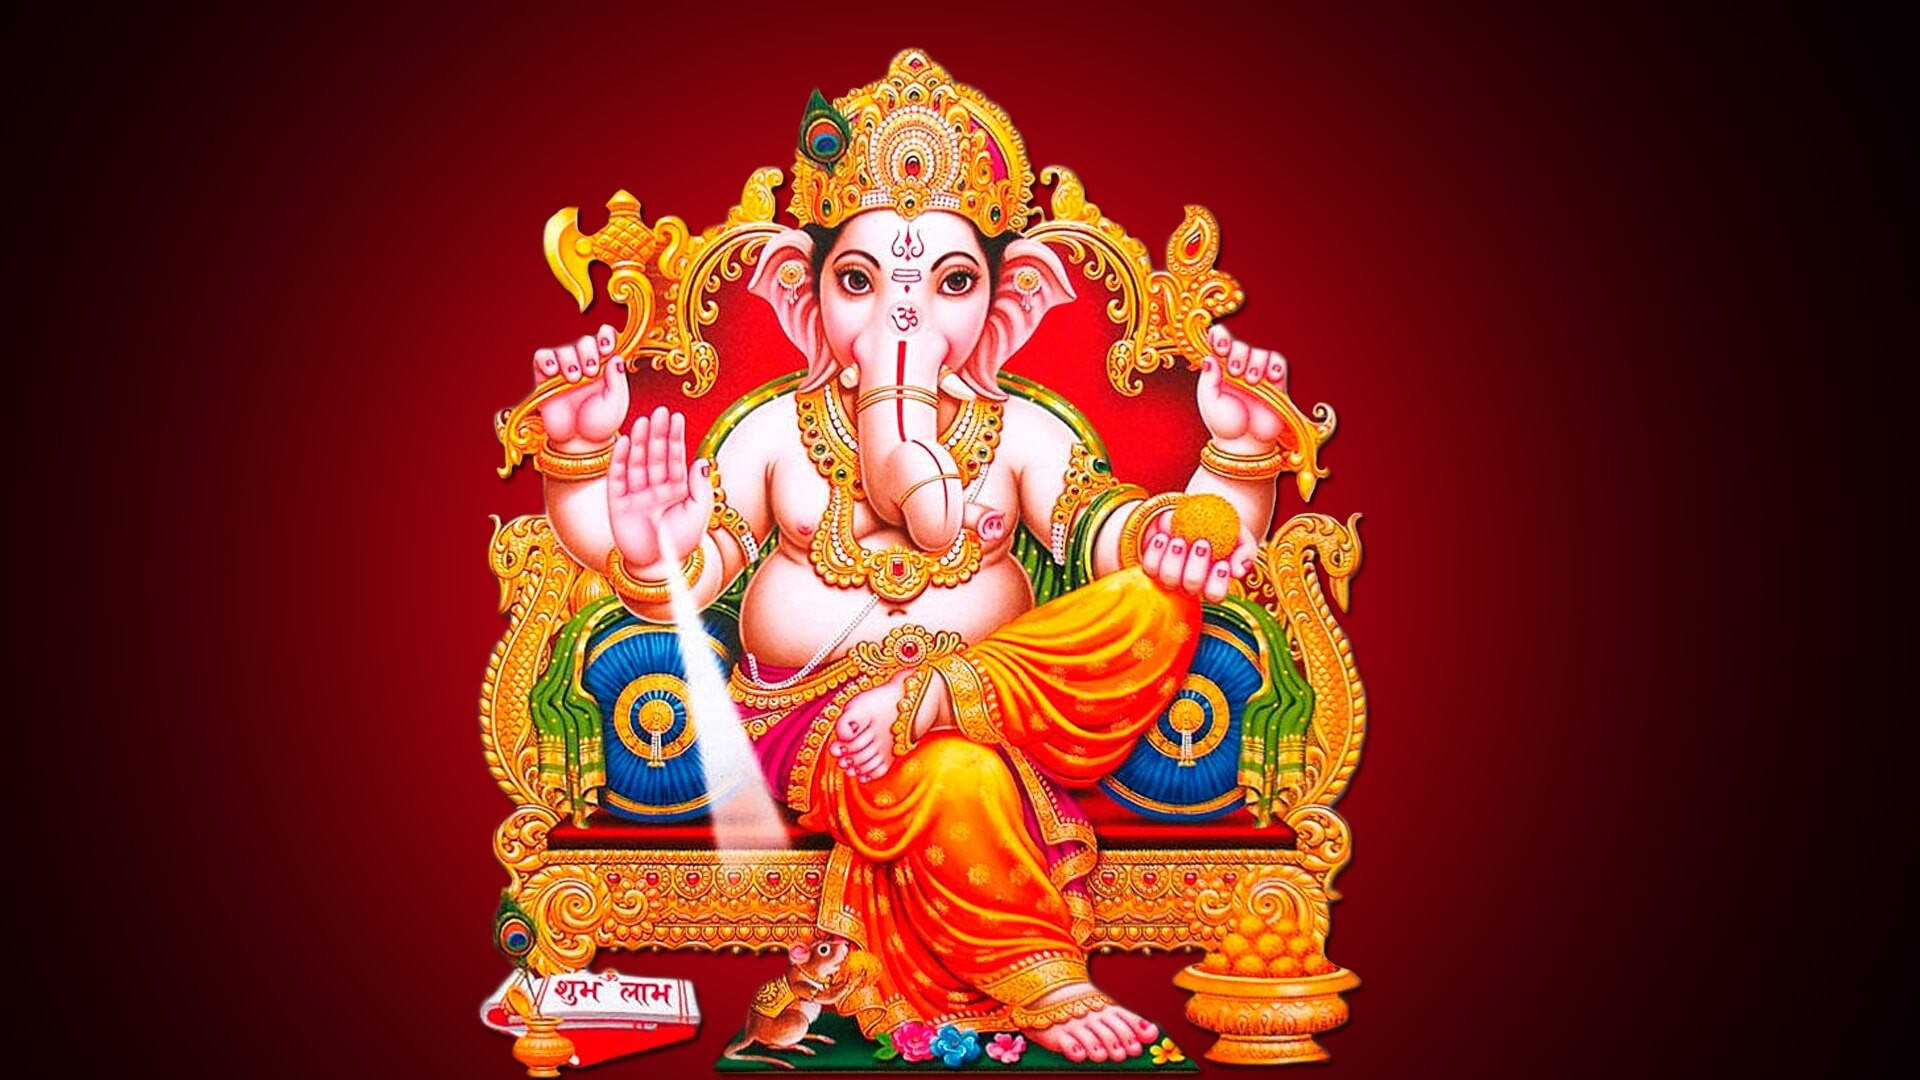 Lord Ganesha In Red Vignette Background